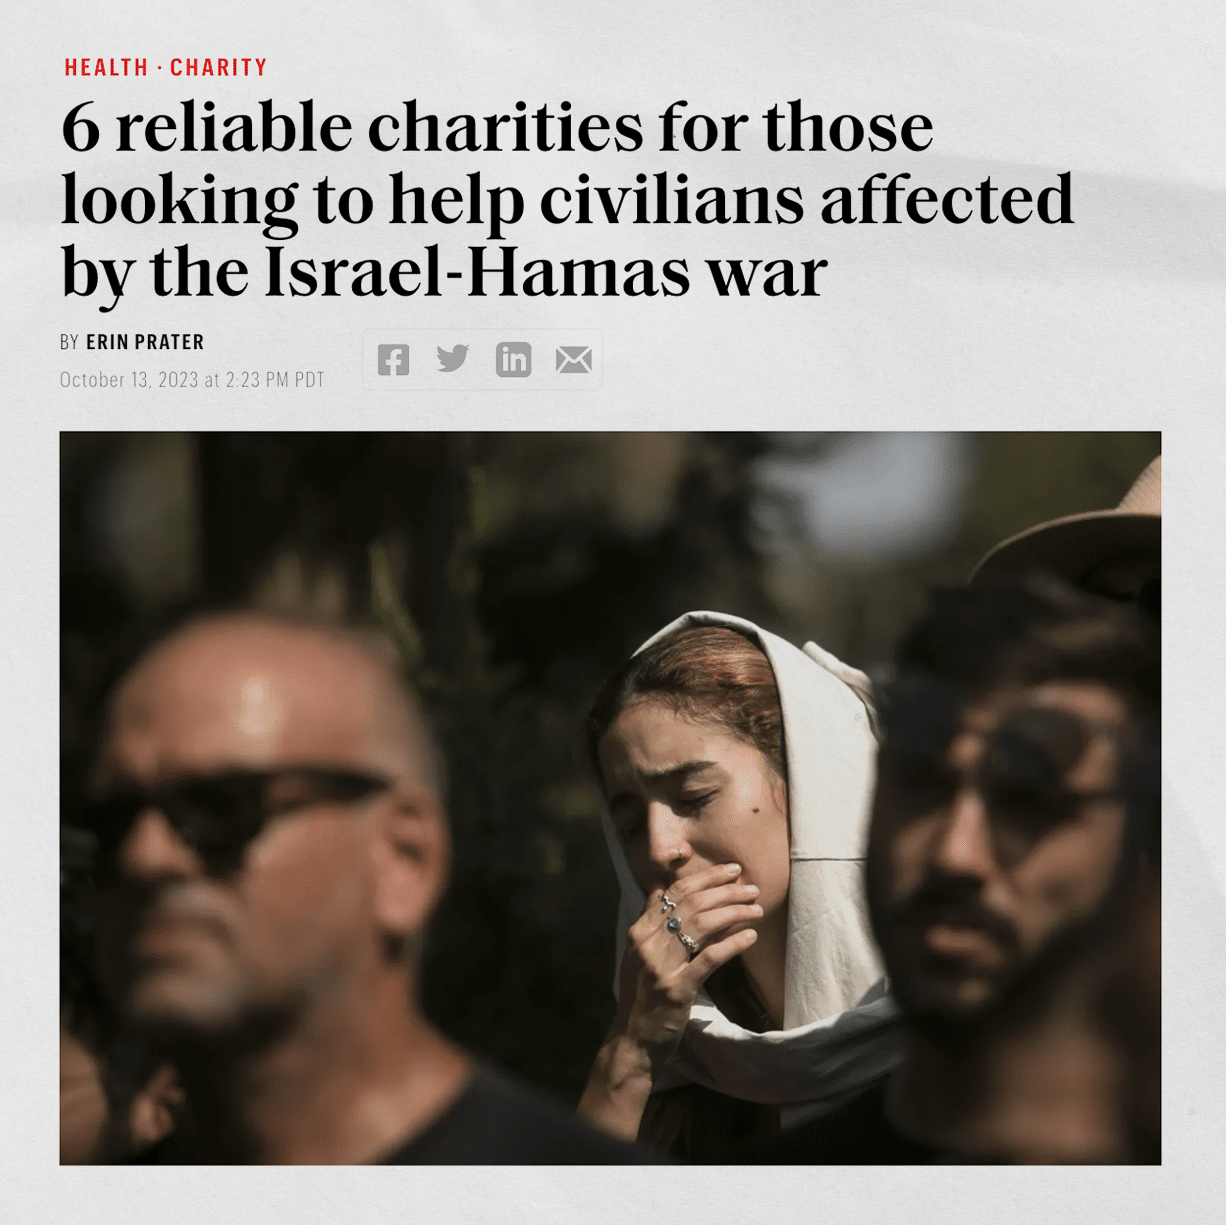 6 reliable charities for those looking to help civilians affected by the Israel-Hamas war